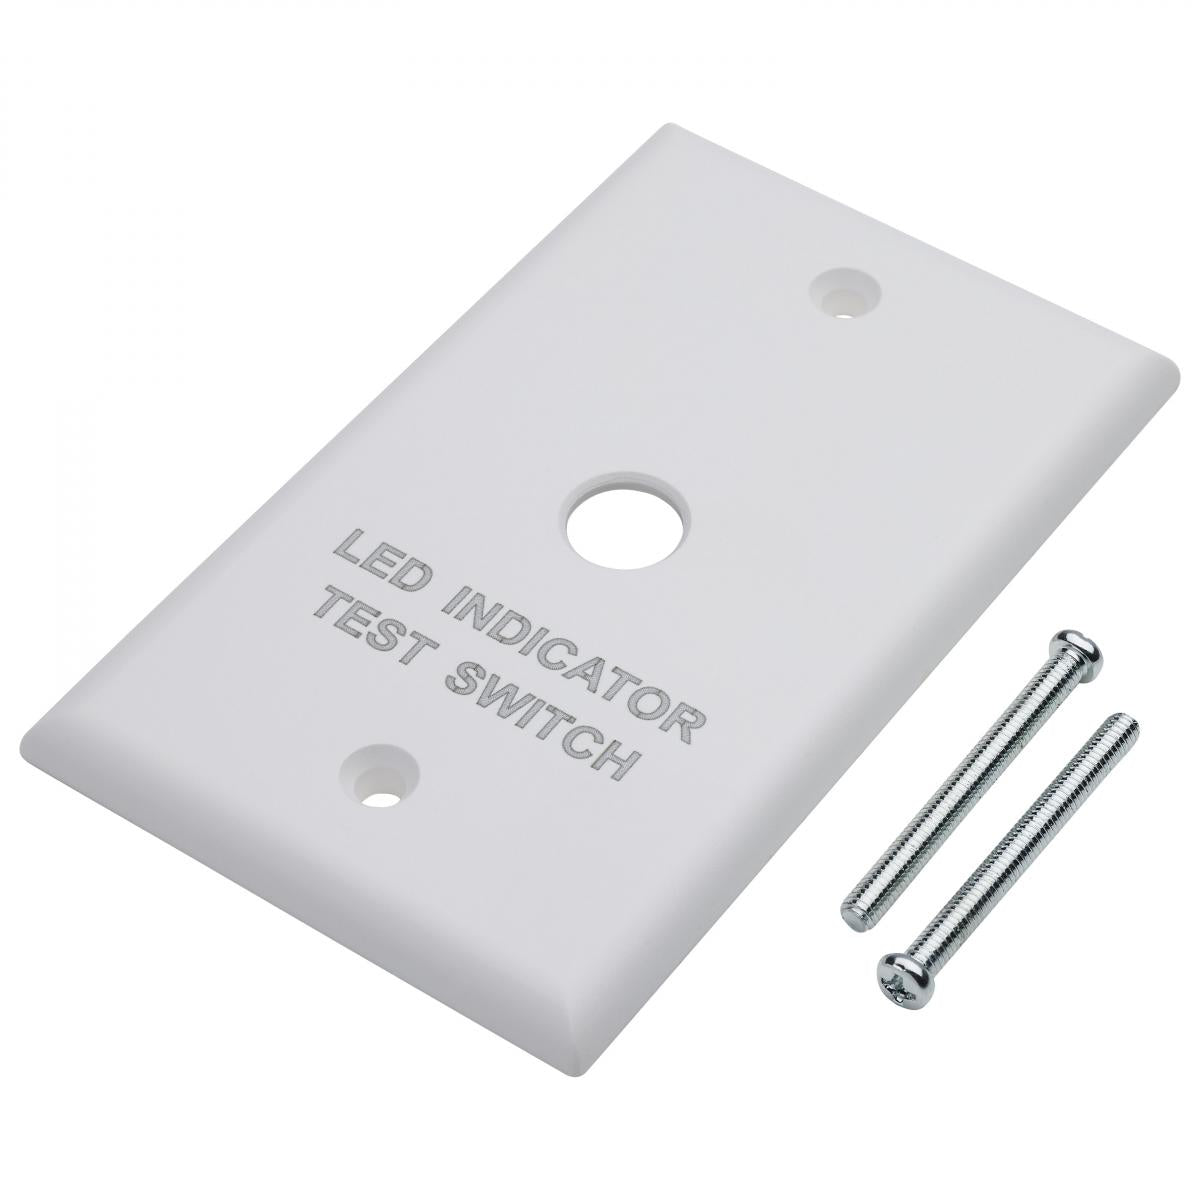 Emergency Remote Test Switch, Single Gang Plate, White Finish - Bees Lighting